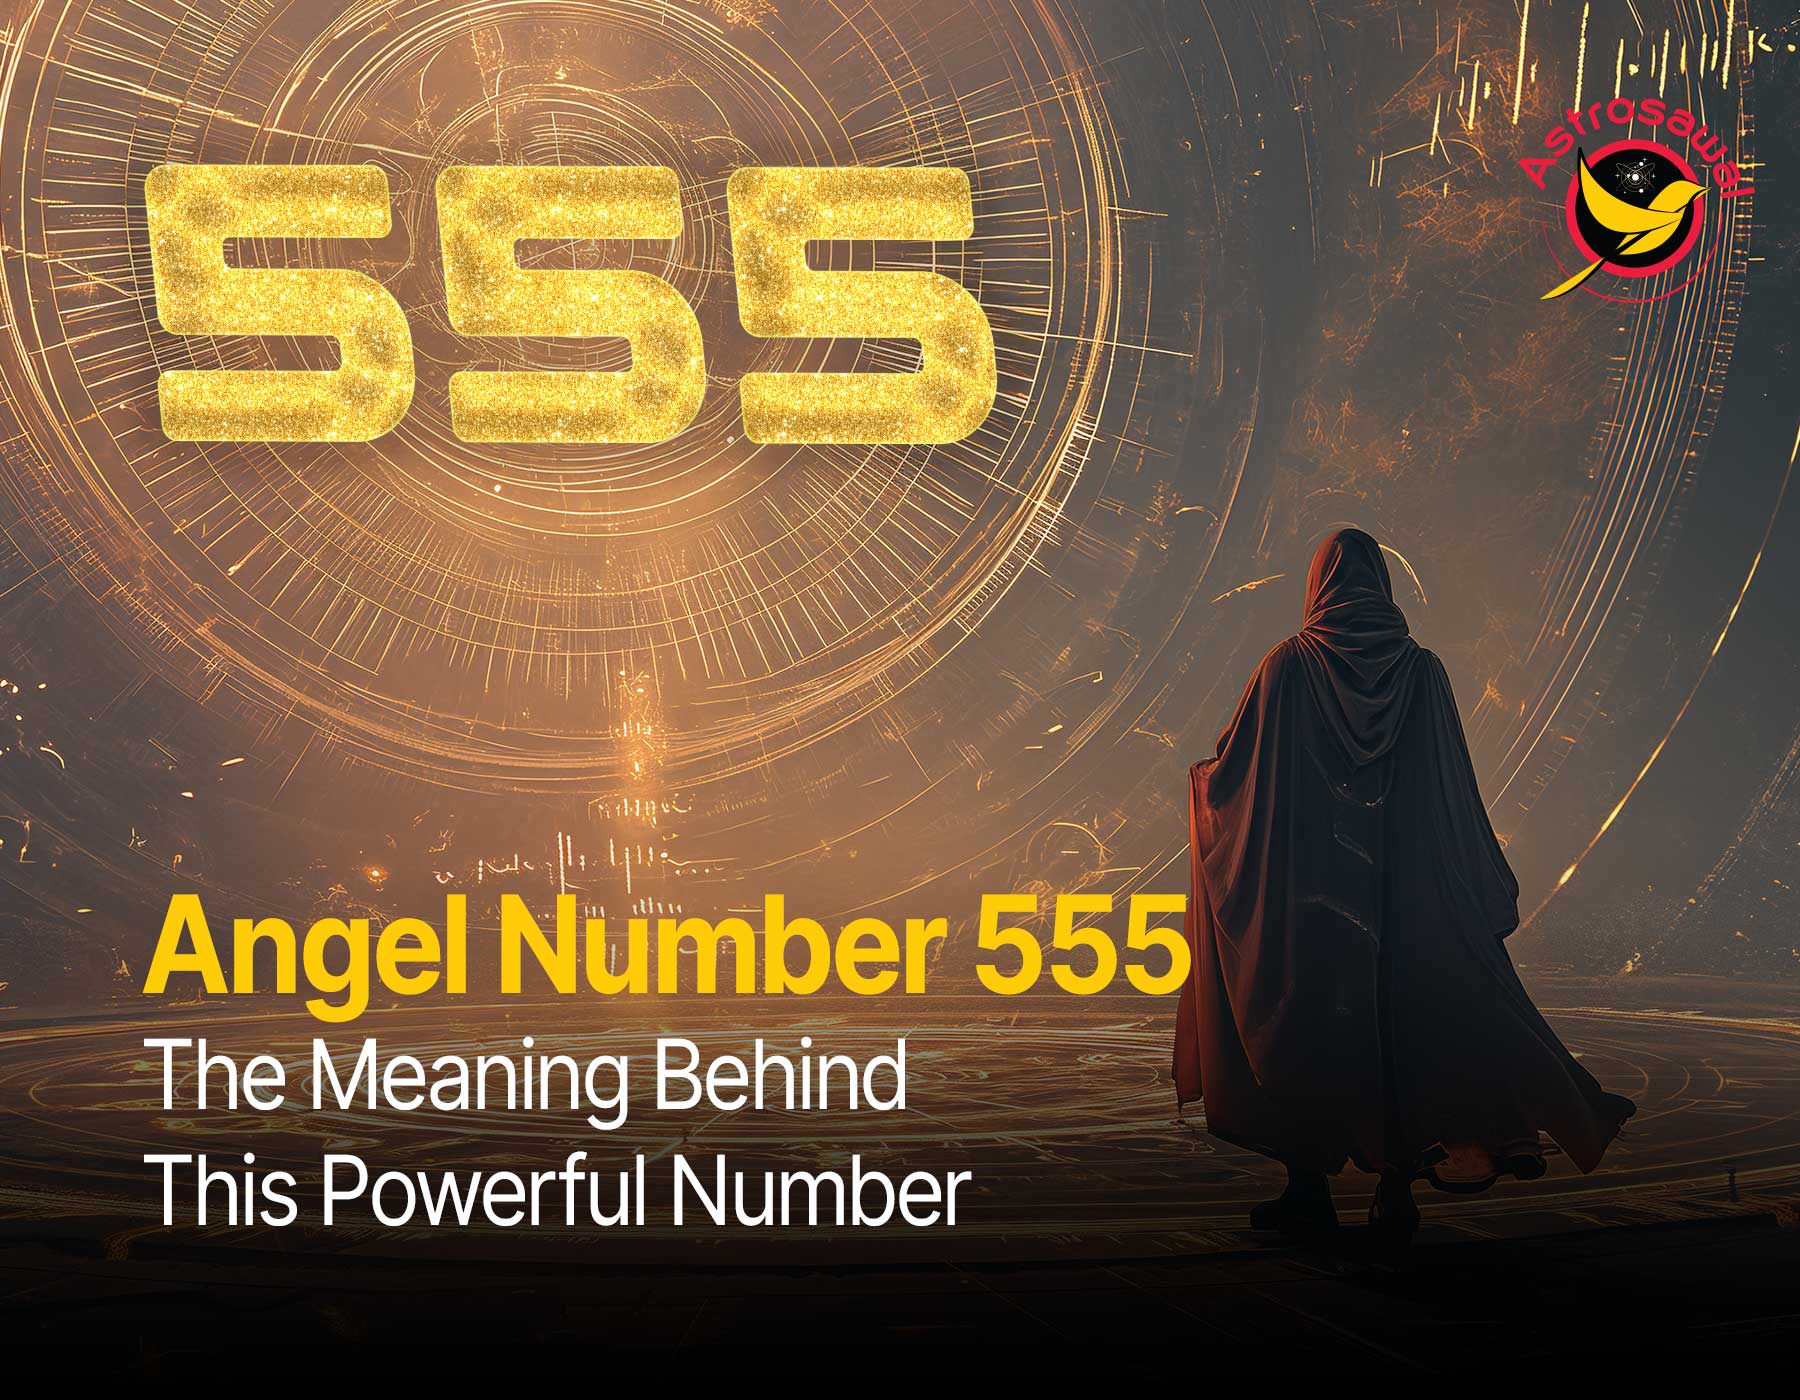 Angel Number 555 : The Meaning Behind This Powerful Number